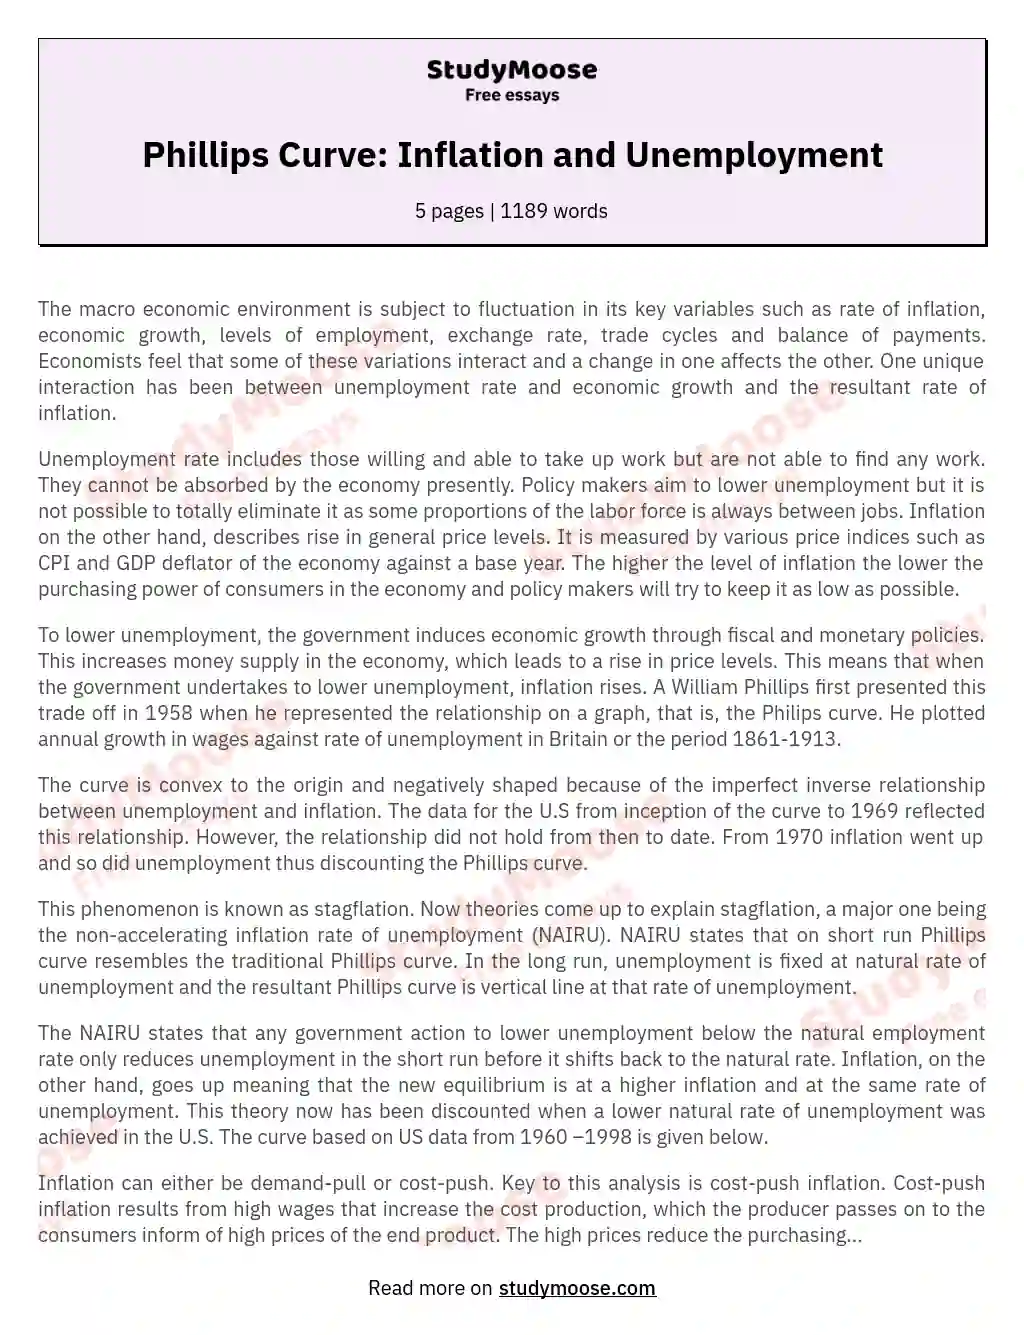 Phillips Curve: Inflation and Unemployment essay